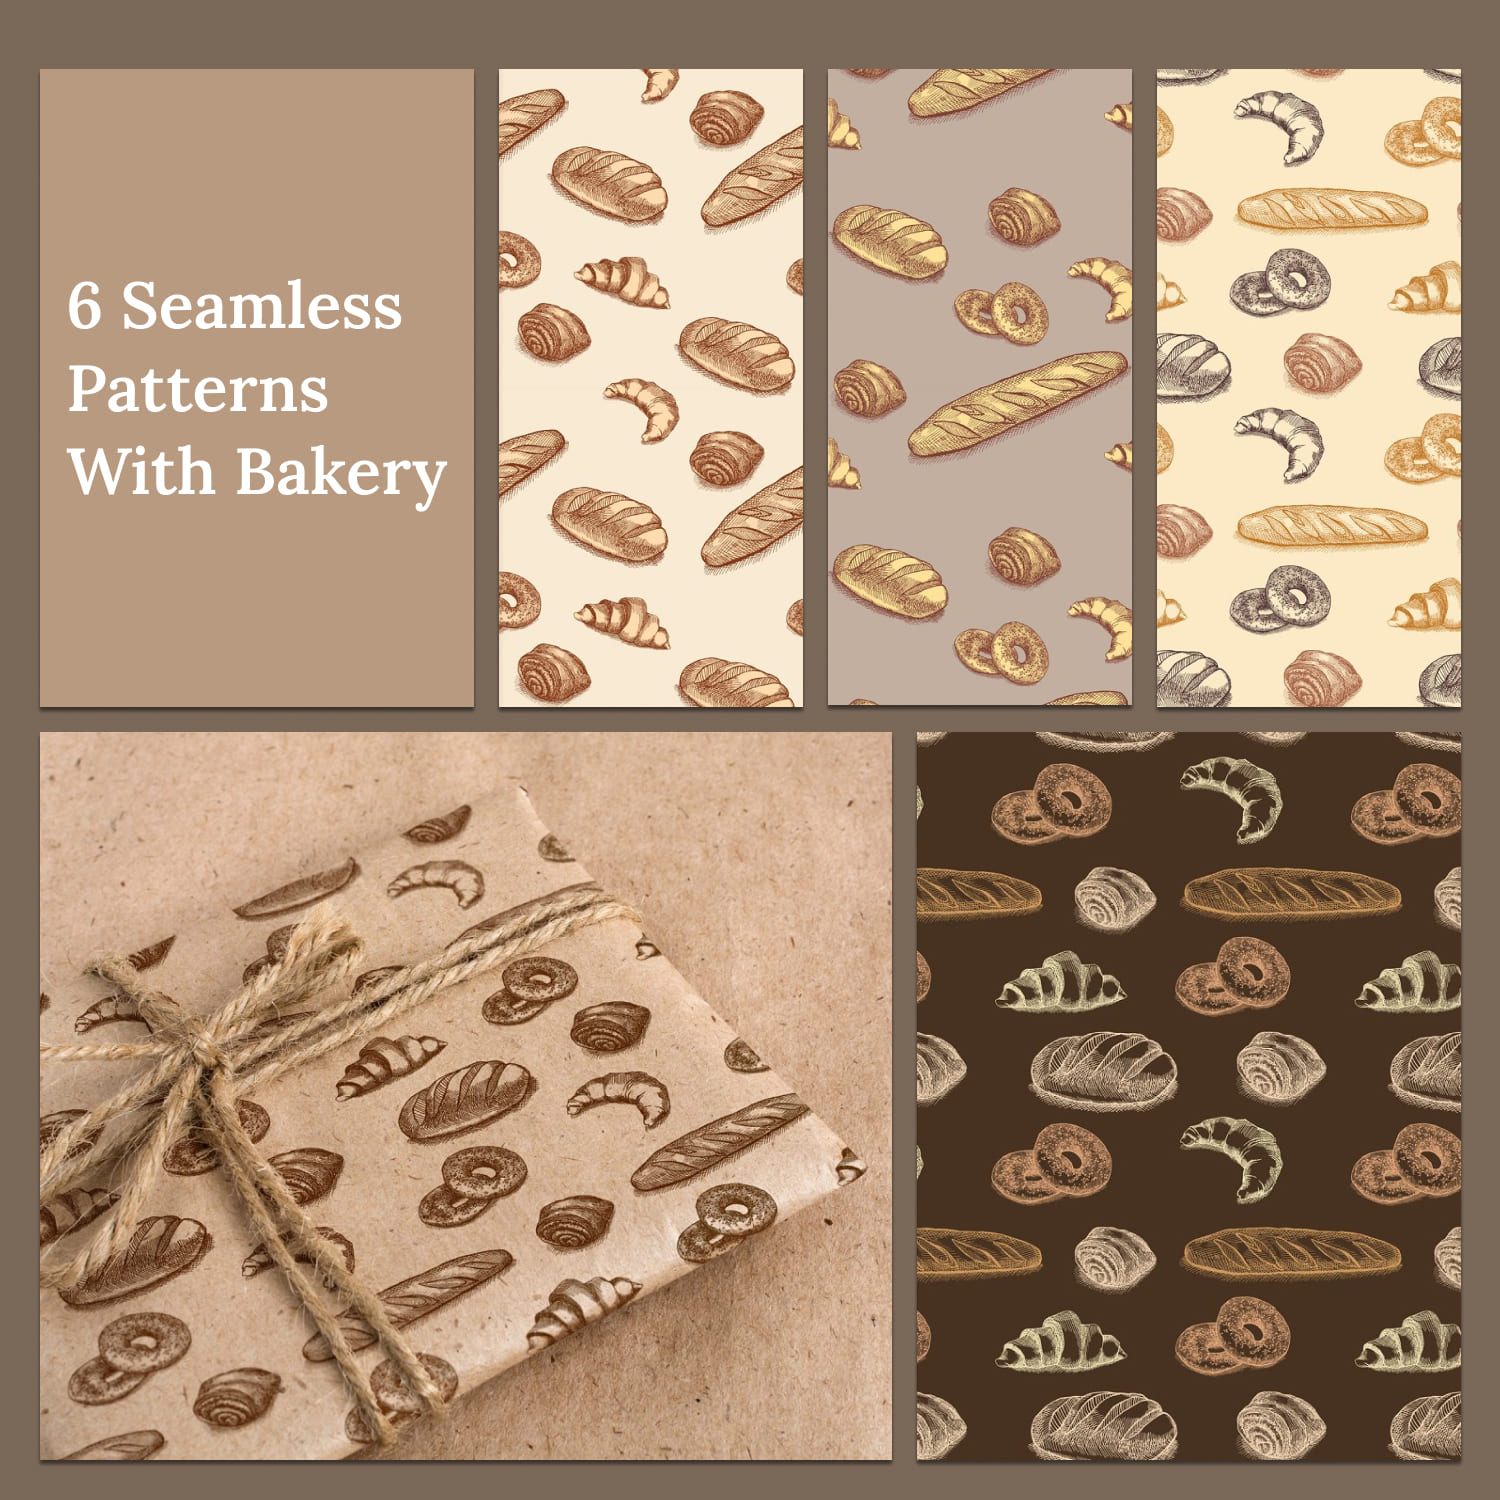 6 seamless patterns with bakery - main image preview.